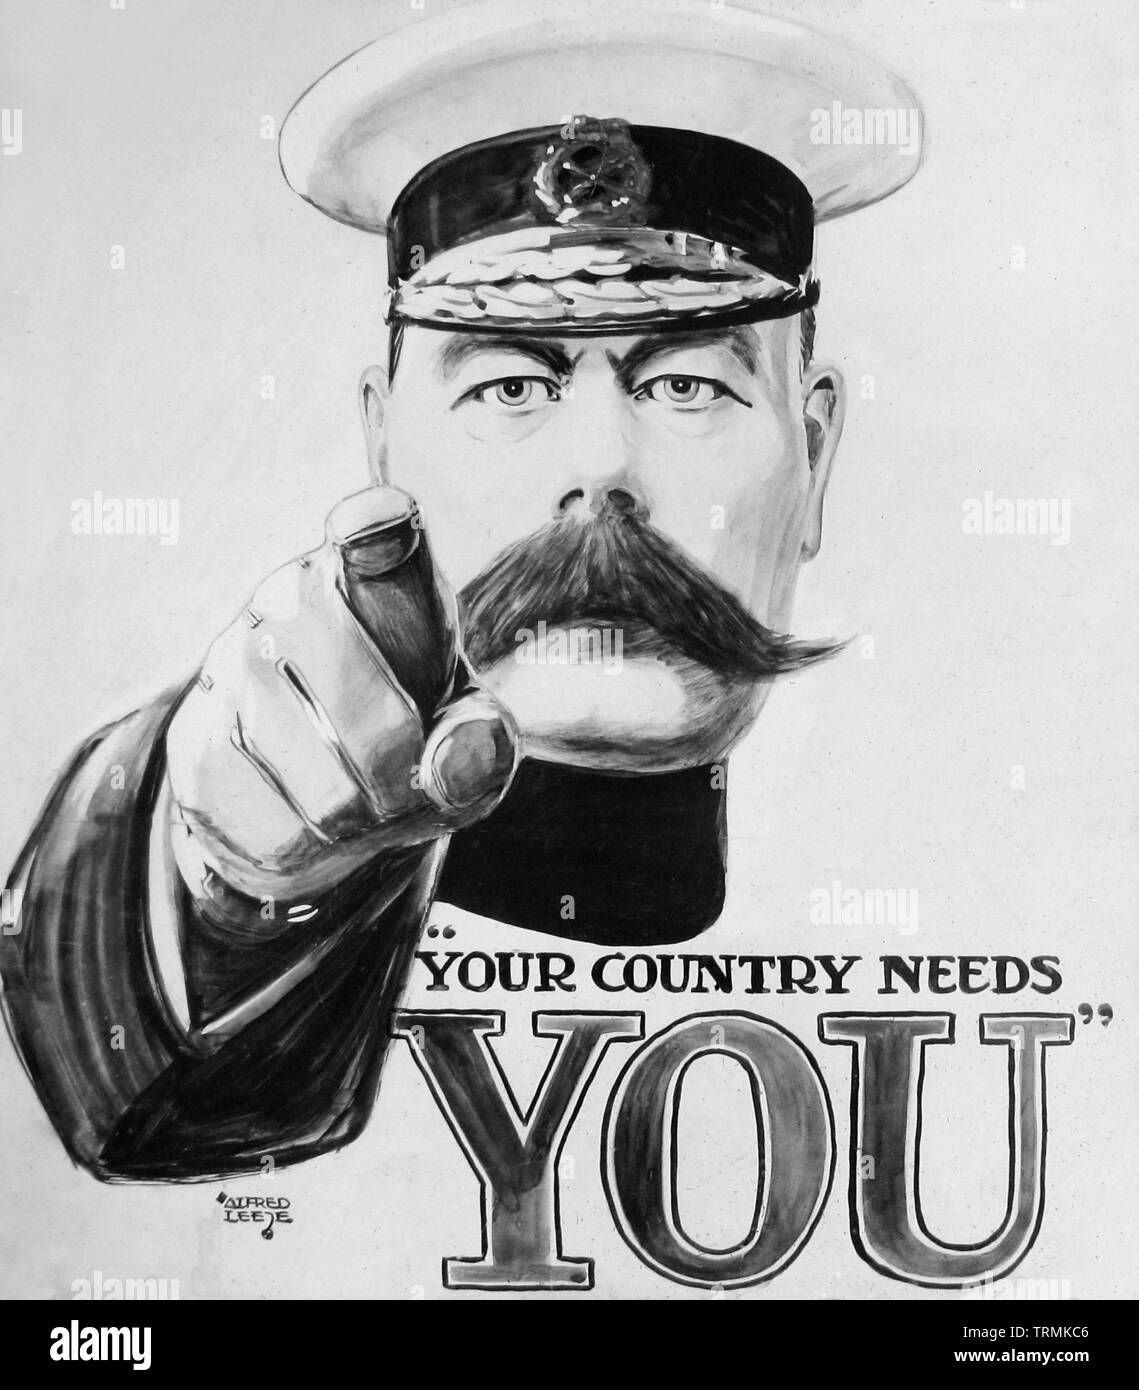 Army recruitment poster 'Your Country needs You' Stock Photo